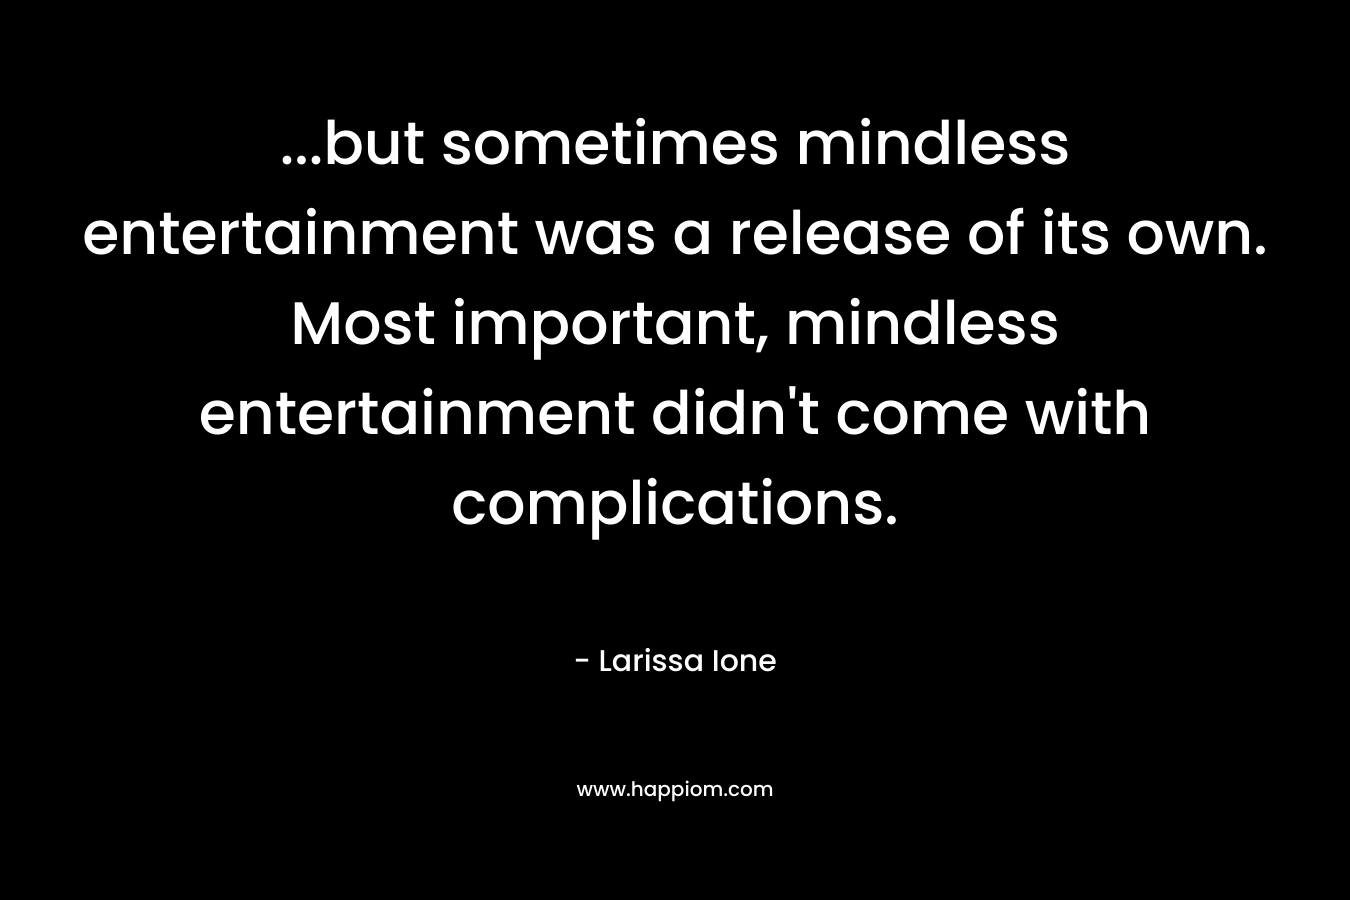 ...but sometimes mindless entertainment was a release of its own. Most important, mindless entertainment didn't come with complications.